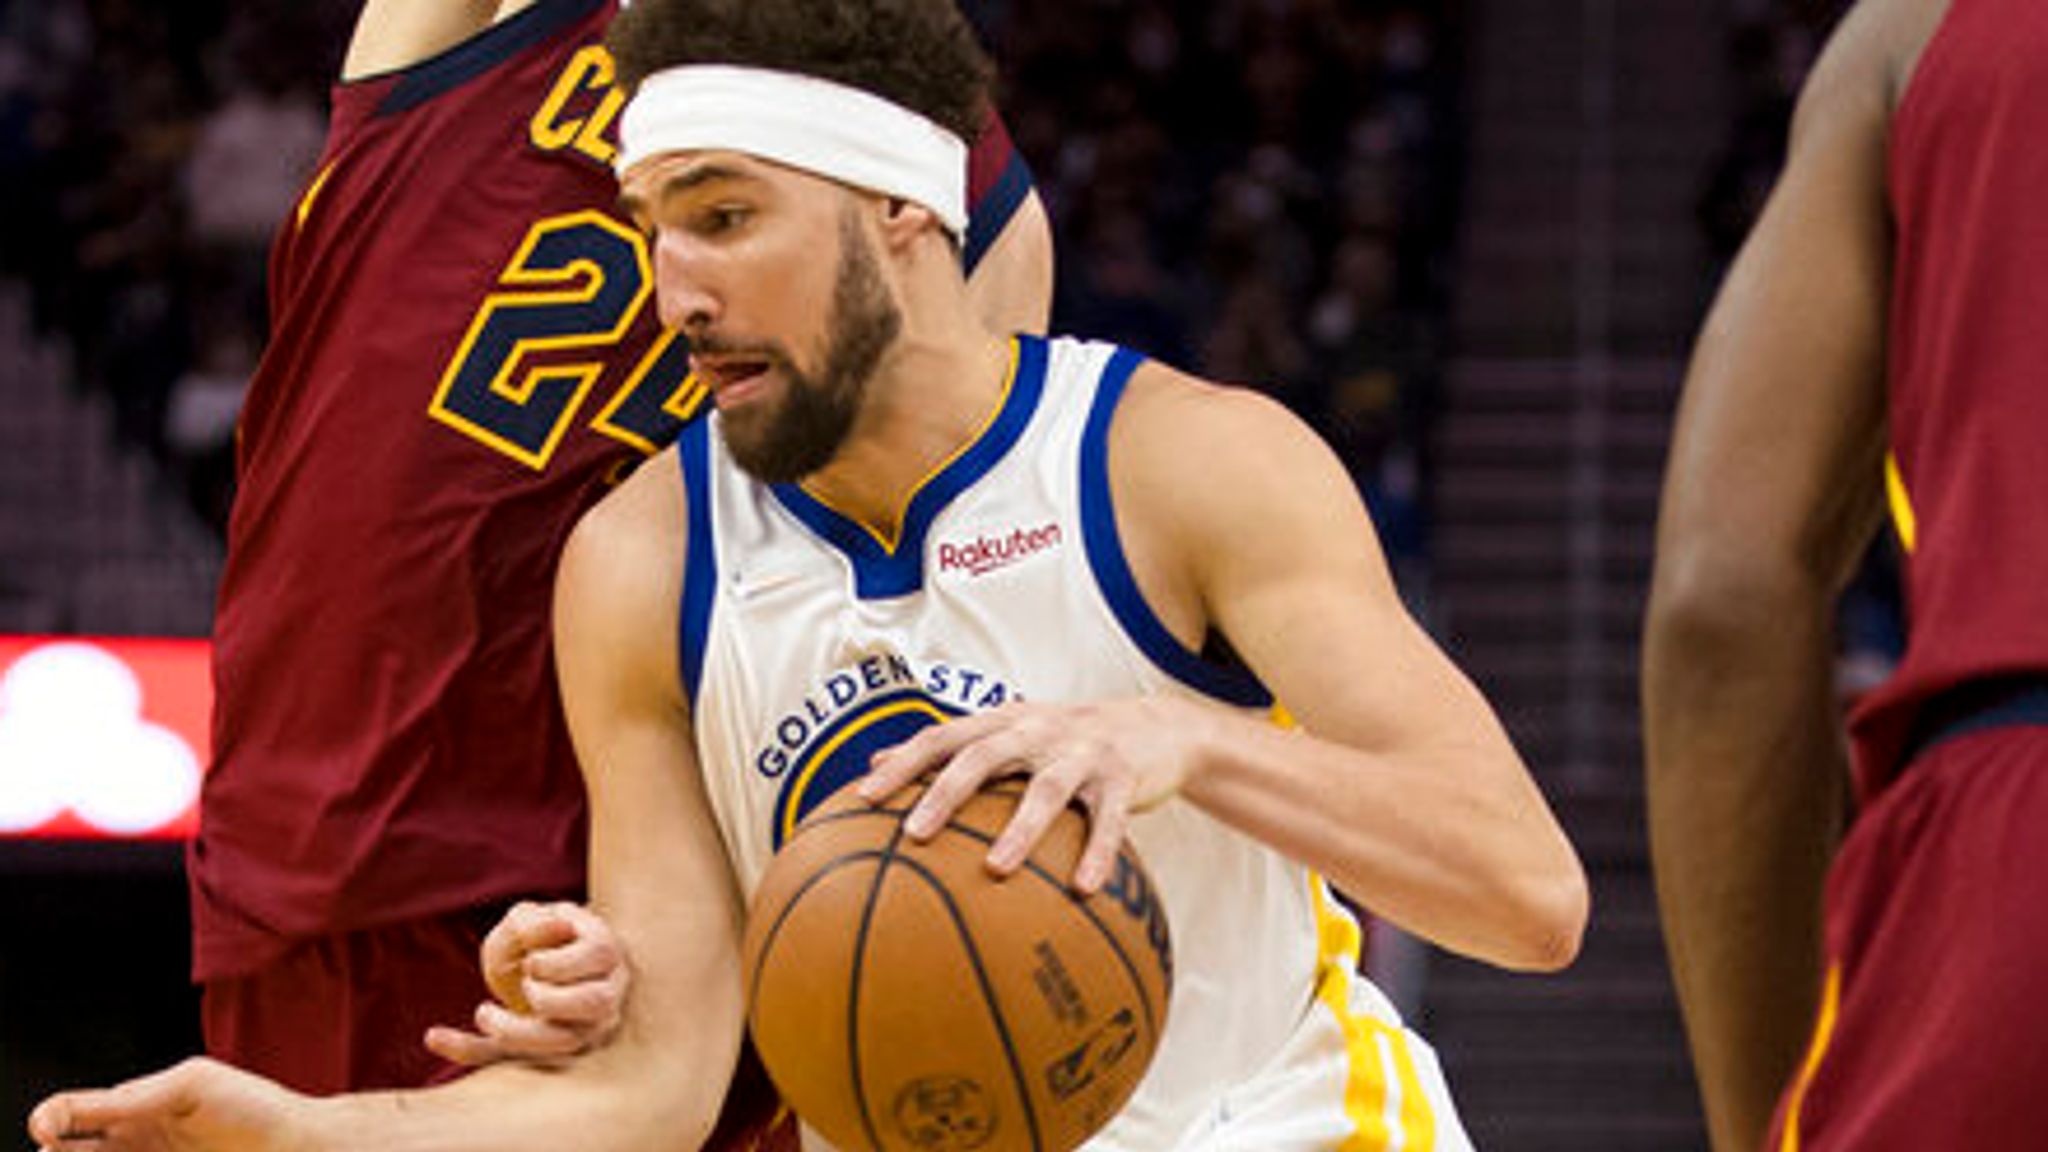 Watch: Warriors' Klay Thompson scores first attempt in return vs. Cavs